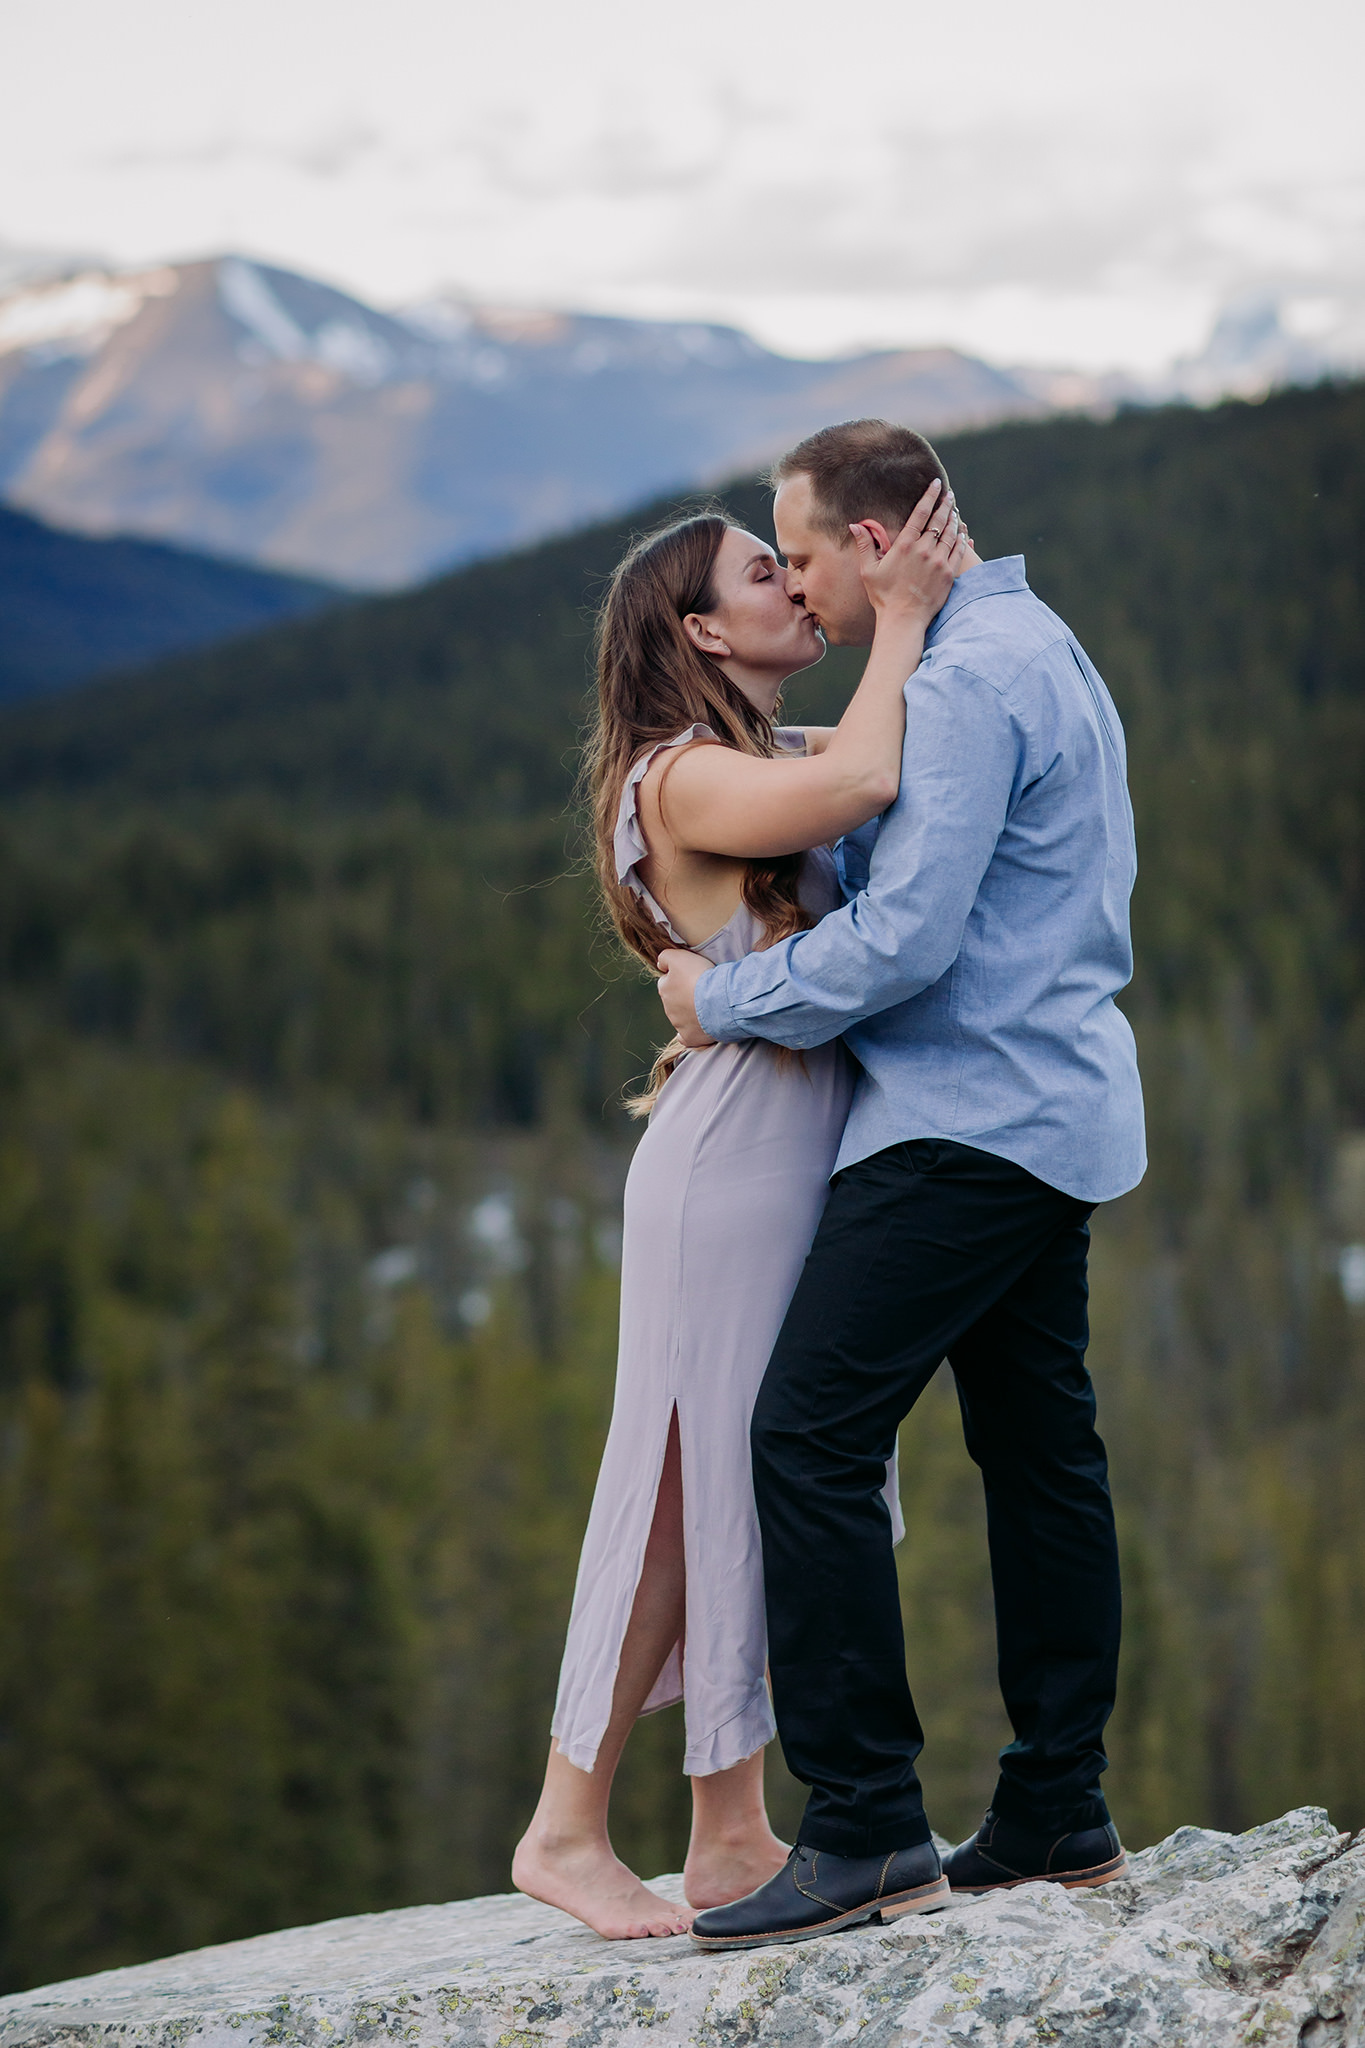 Moraine Lake summer engagement pictures in the mountains